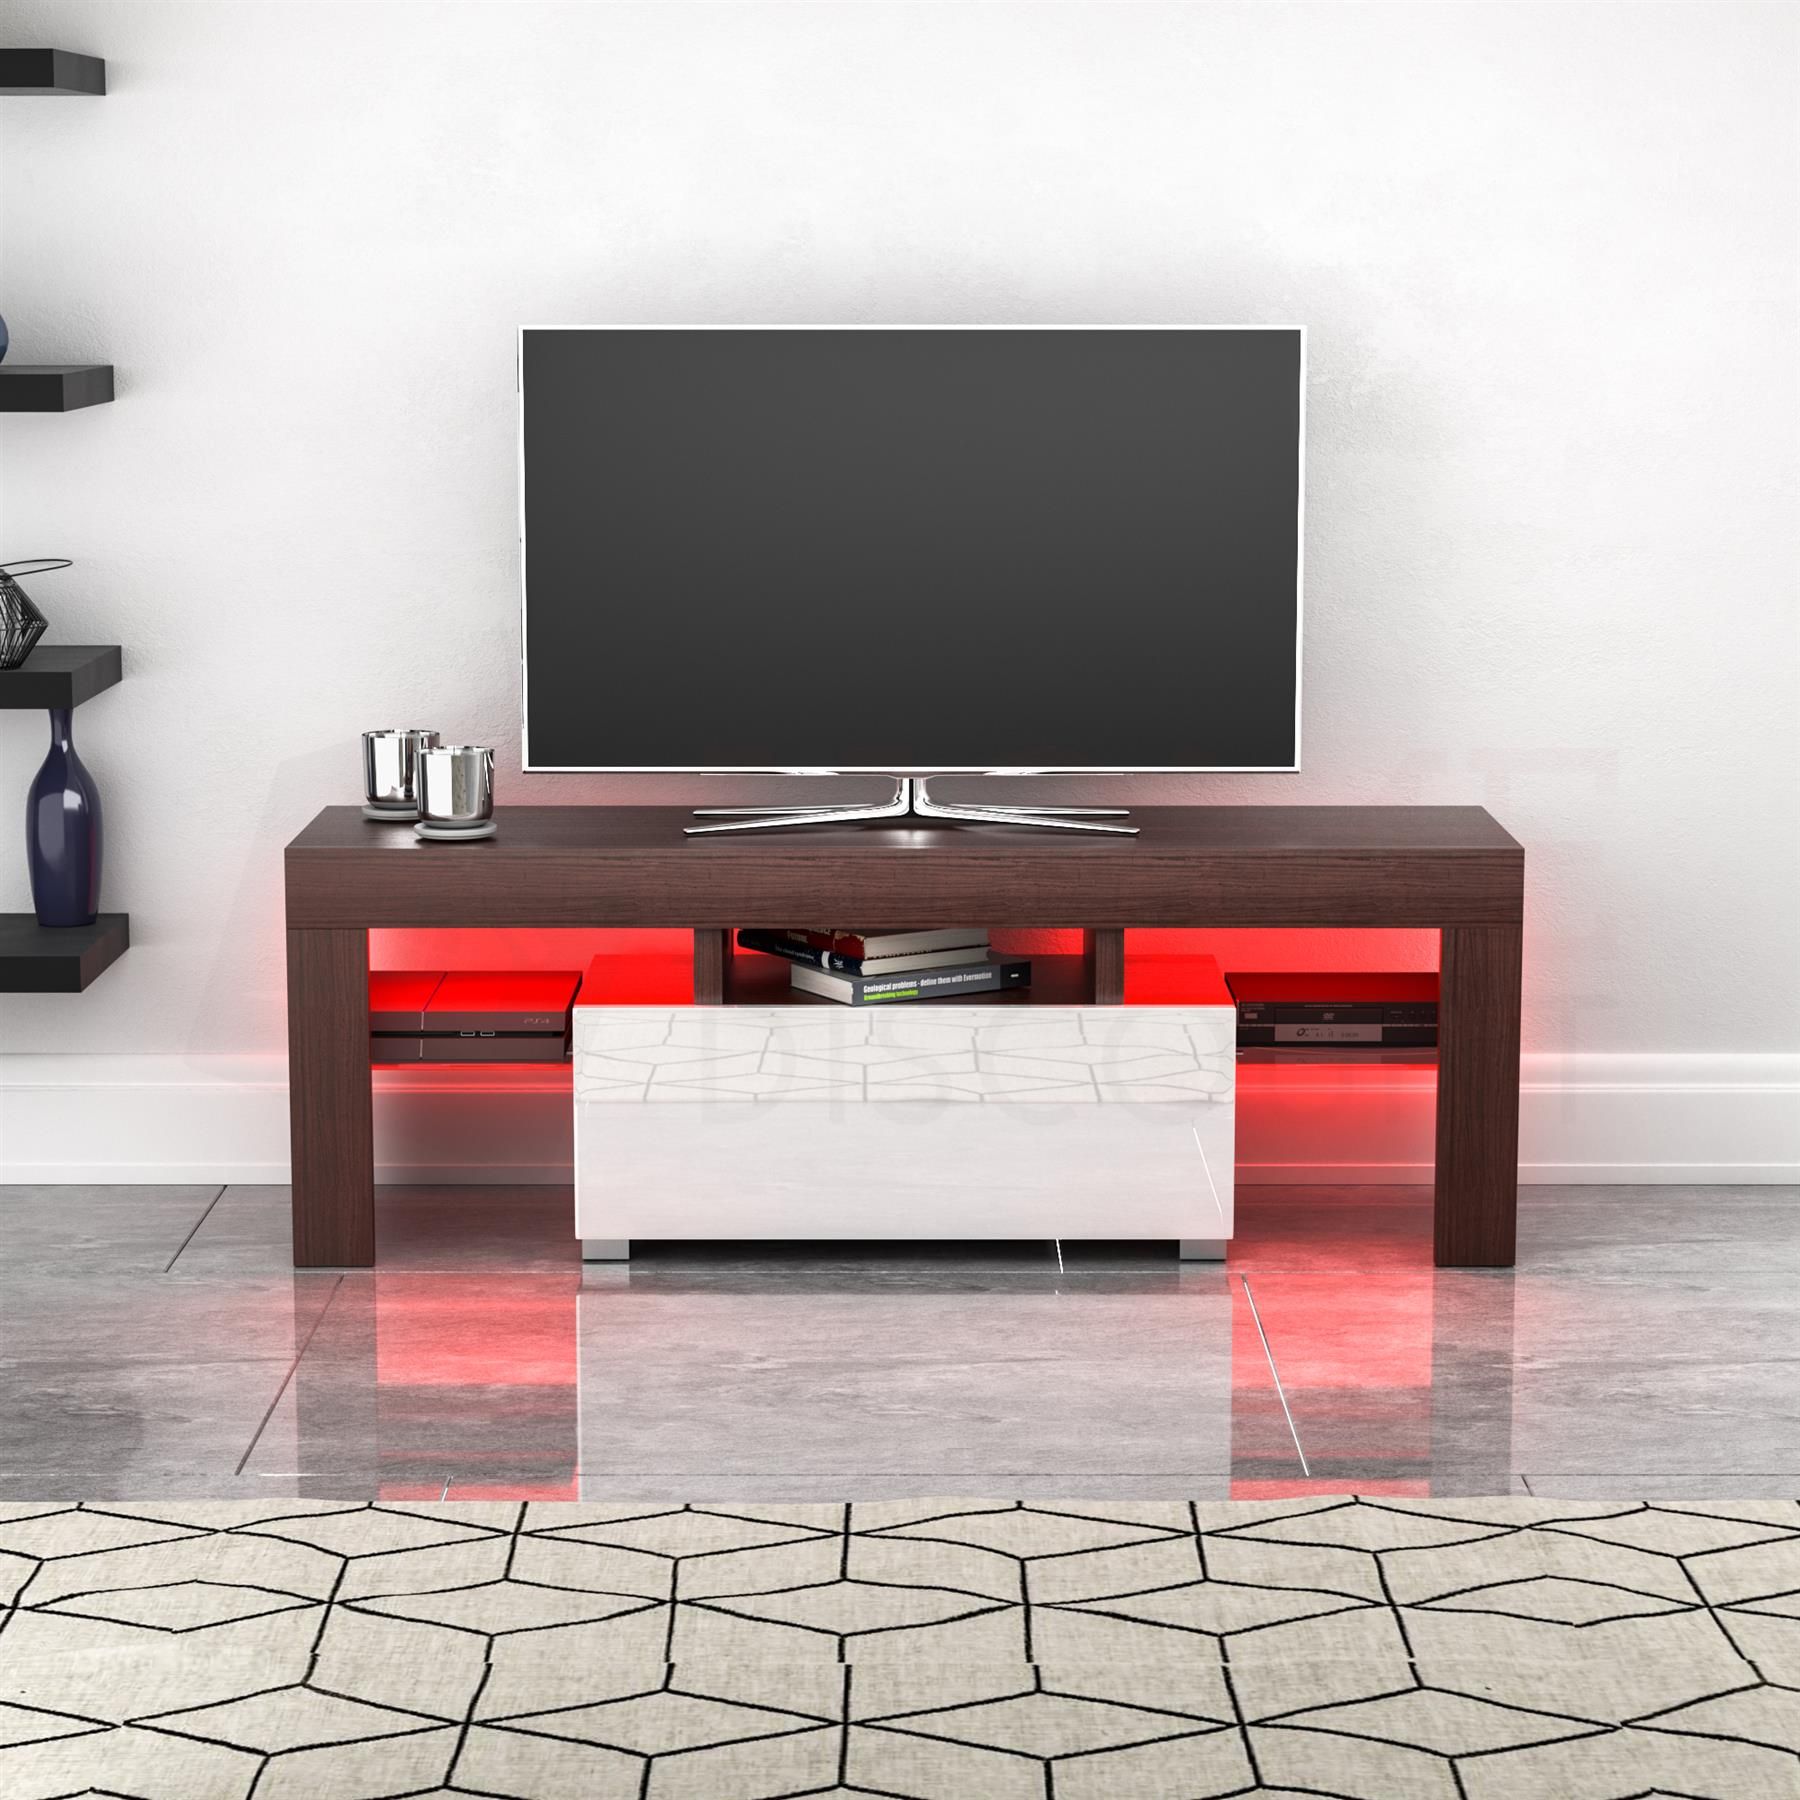 Luna Led Tv Stand Cabinet Unit 1 Drawer Modern Pertaining To Zimtown Modern Tv Stands High Gloss Media Console Cabinet With Led Shelf And Drawers (View 2 of 15)